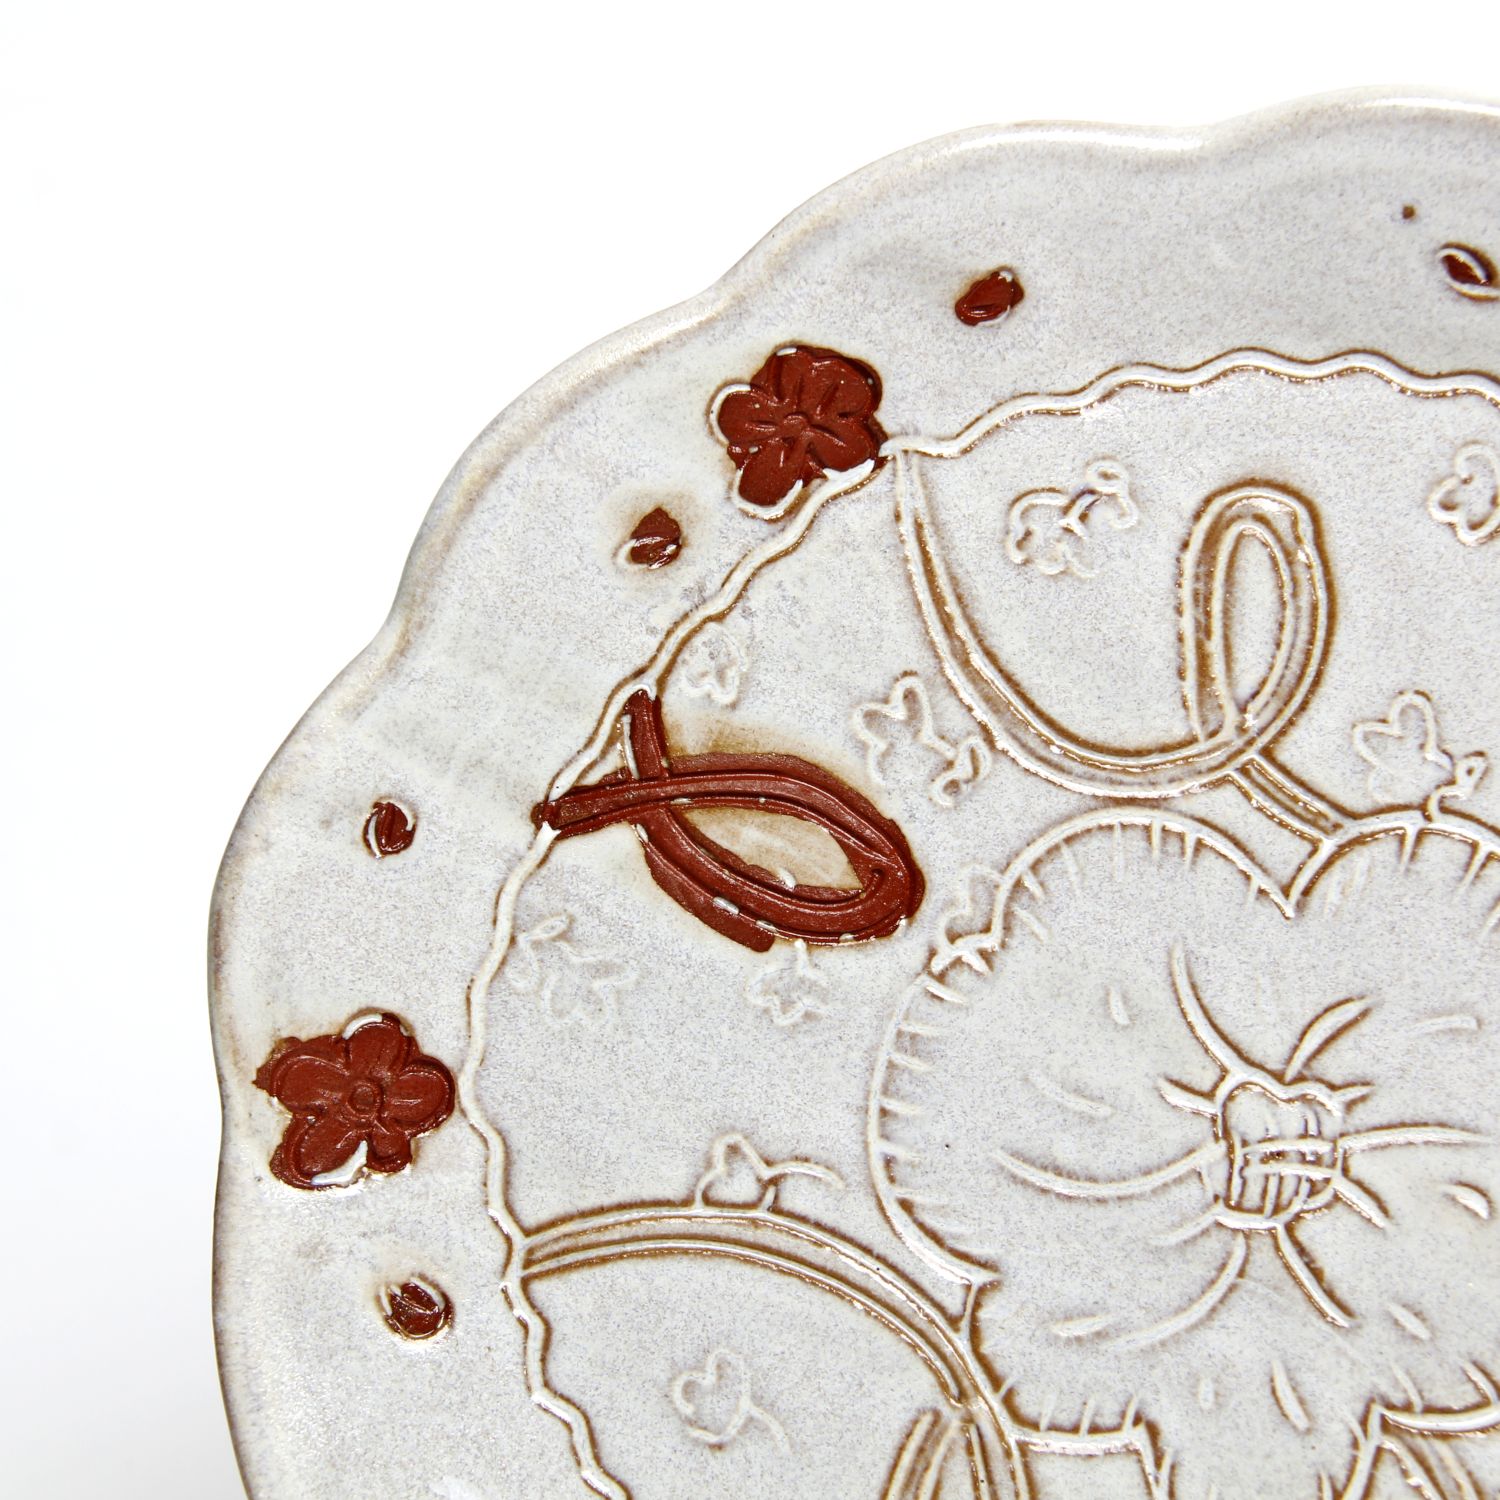 Zoe Pinnell: Small White Plate With Floral Centre Product Image 2 of 4